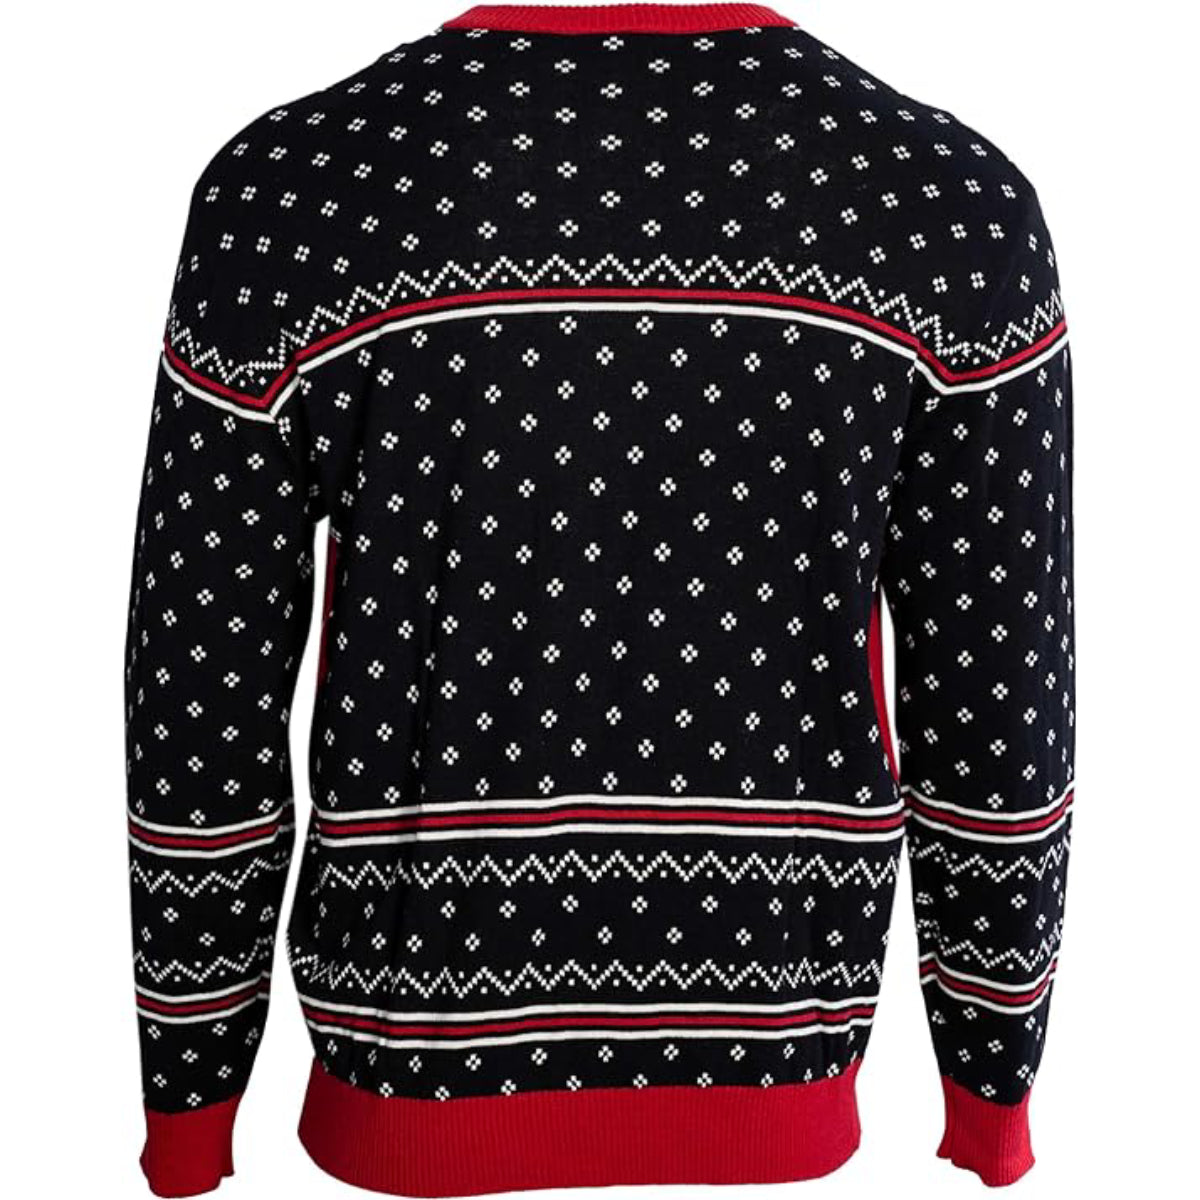 Boyz N The Hood Ugly Christmas Sweaters Doughboy's Gangster Style for the Holidays Back View